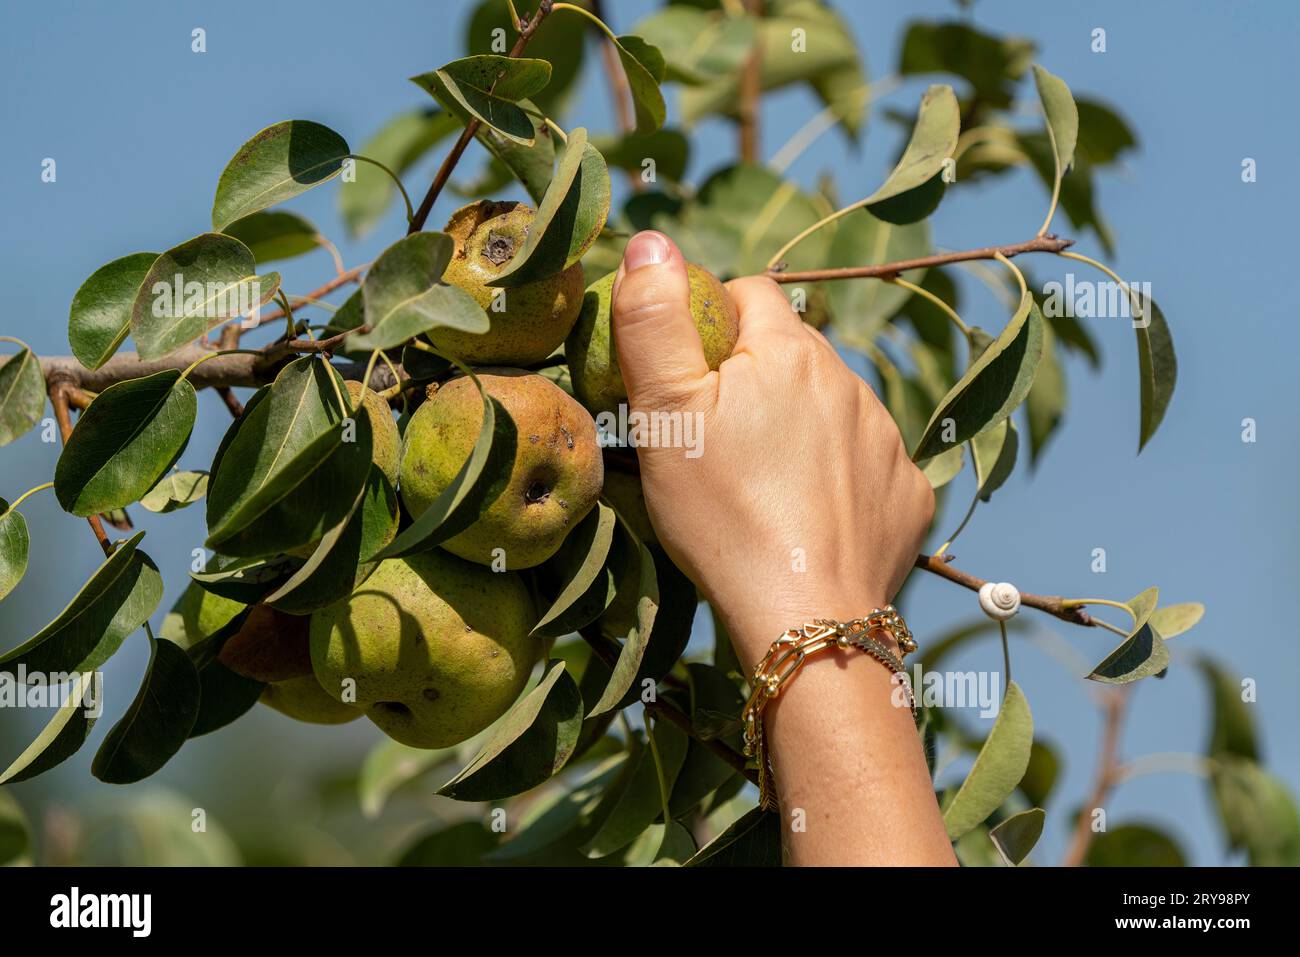 Woman's hand picking fruit. picking a pear from a branch. Stock Photo